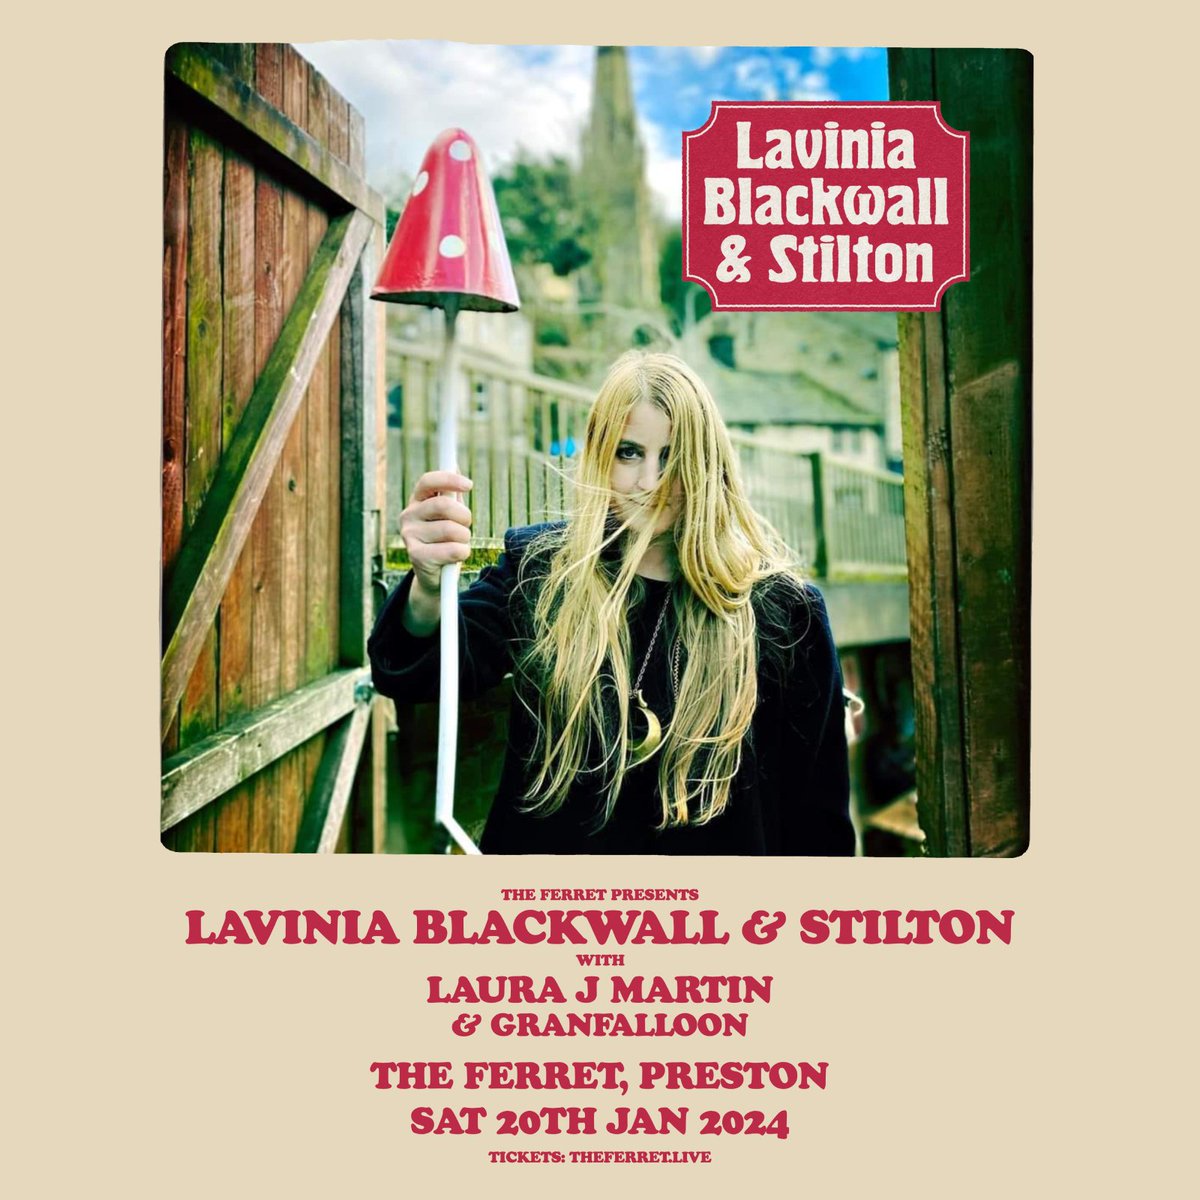 New show for 2024 - 20th January at the Ferret in Preston with Lavinia Blackwall and Laura J Martin.

#altfolk #preston #lancs #january #whatson #2024 #laviniablackwall #granfalloon